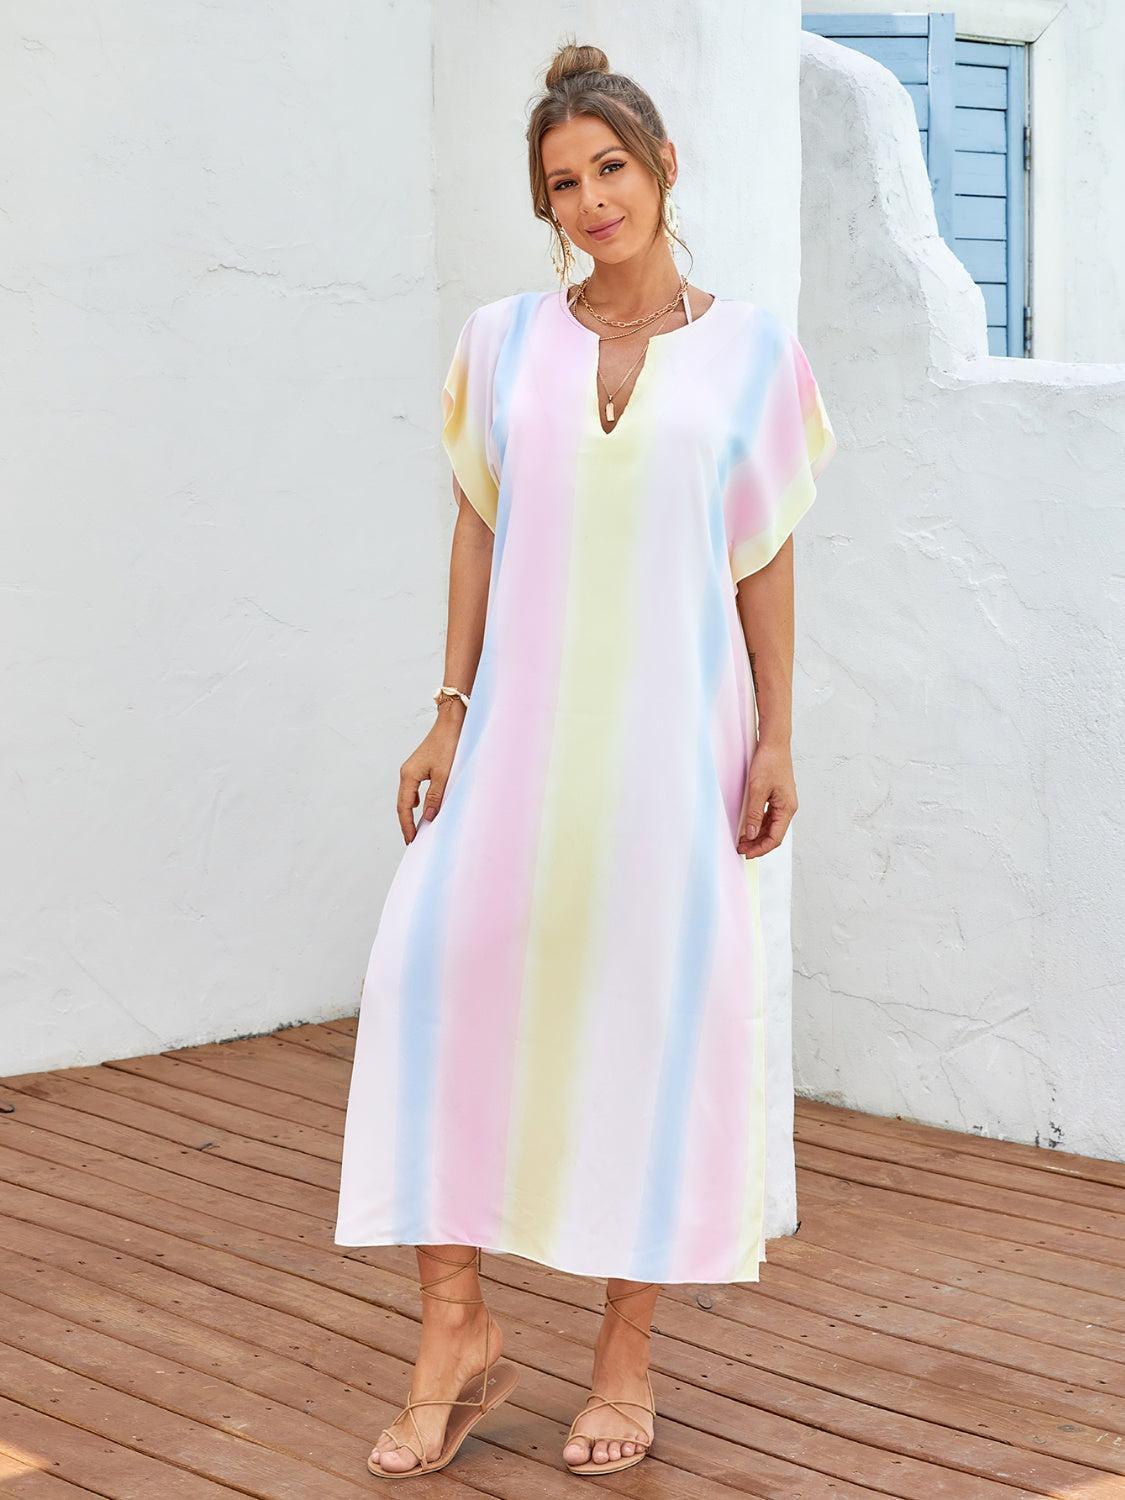 a woman standing on a deck wearing a rainbow colored dress